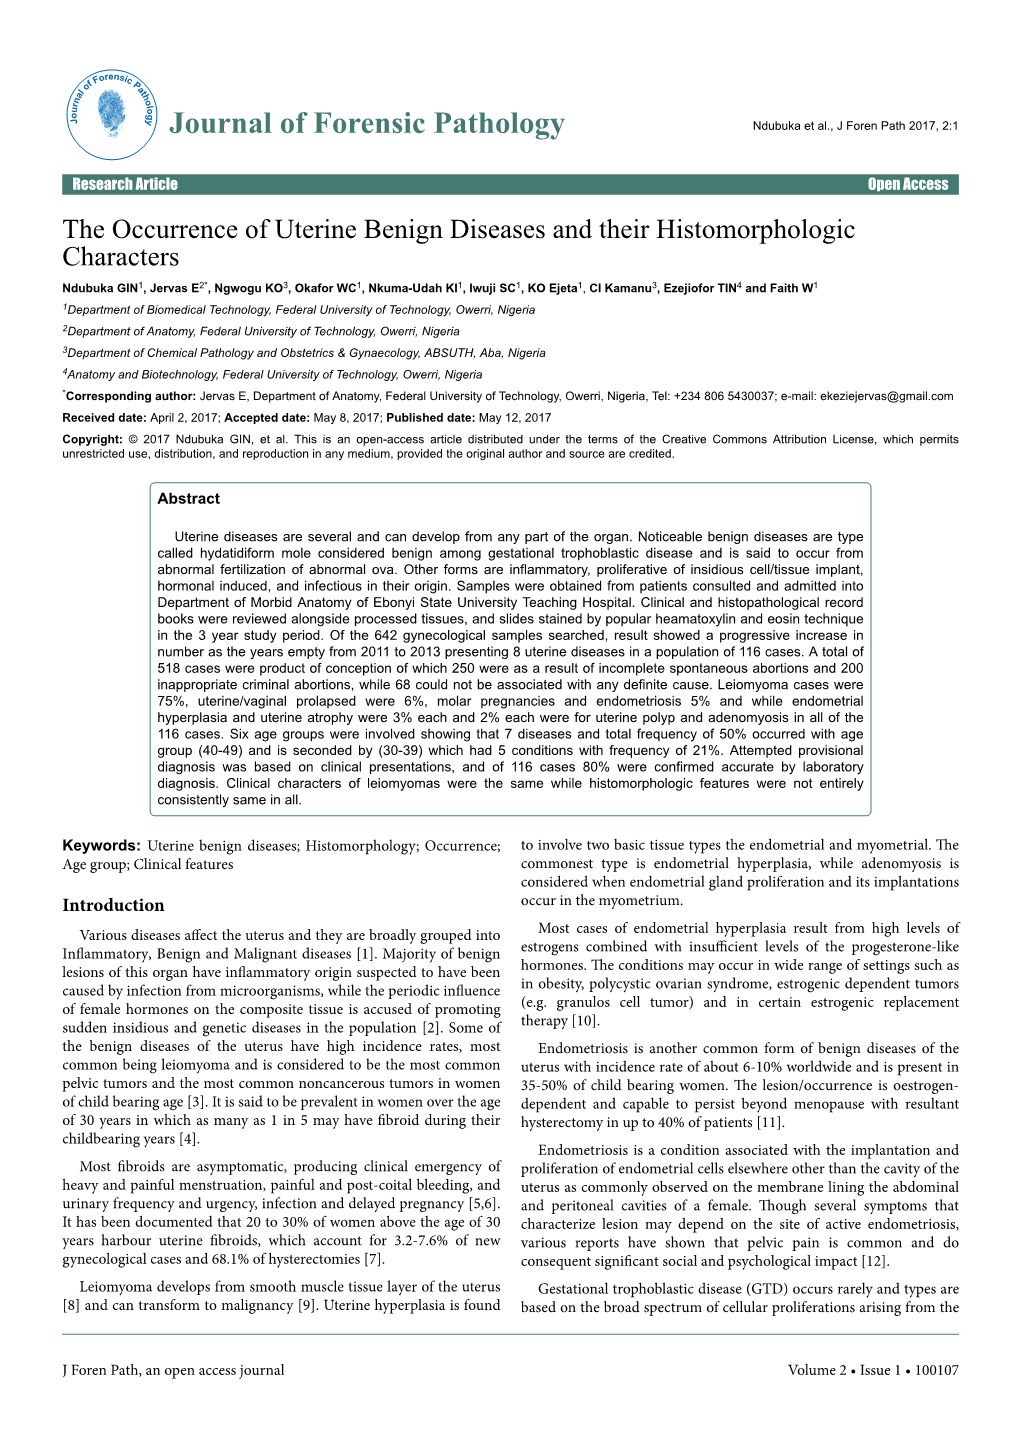 The Occurrence of Uterine Benign Diseases and Their